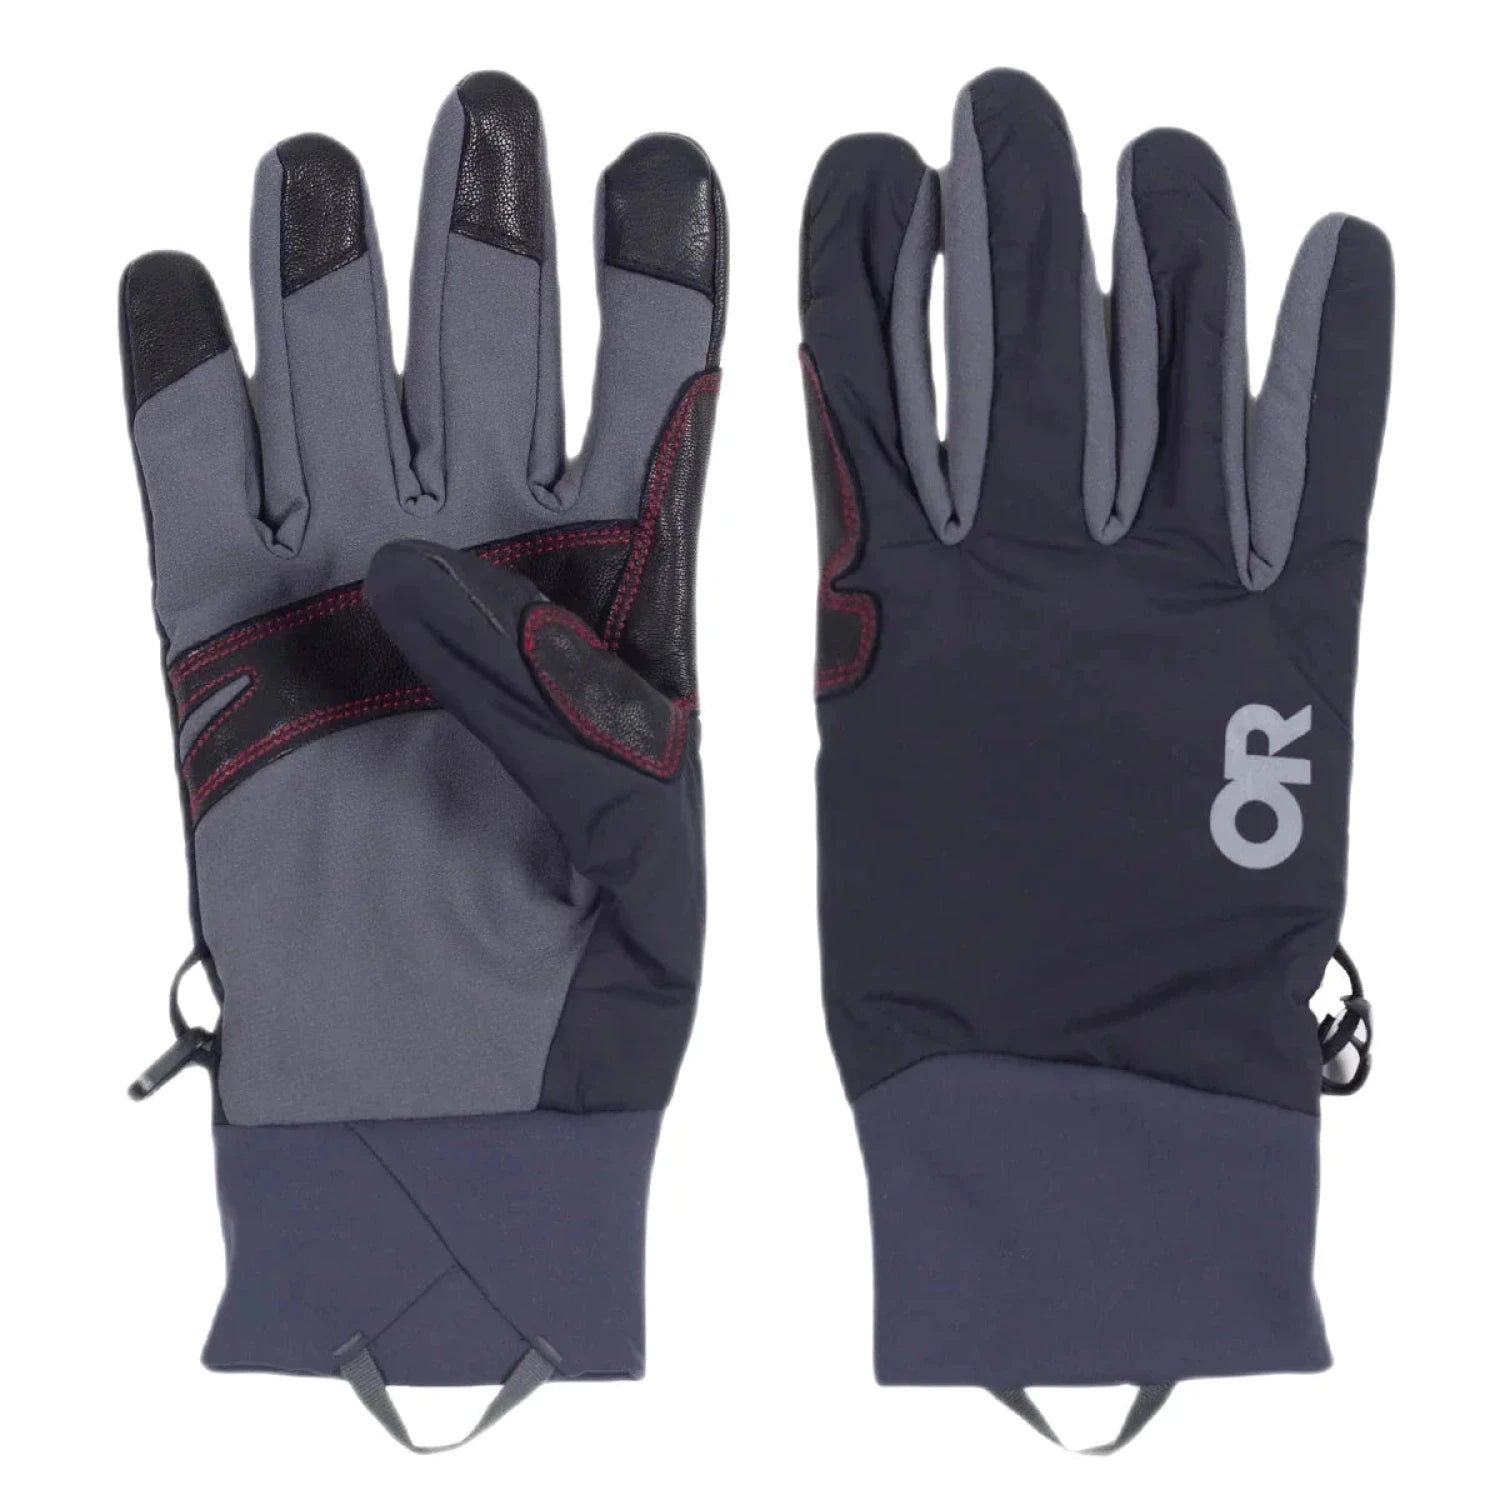 Outdoor Research Deviator Gloves shown in the Black color option.